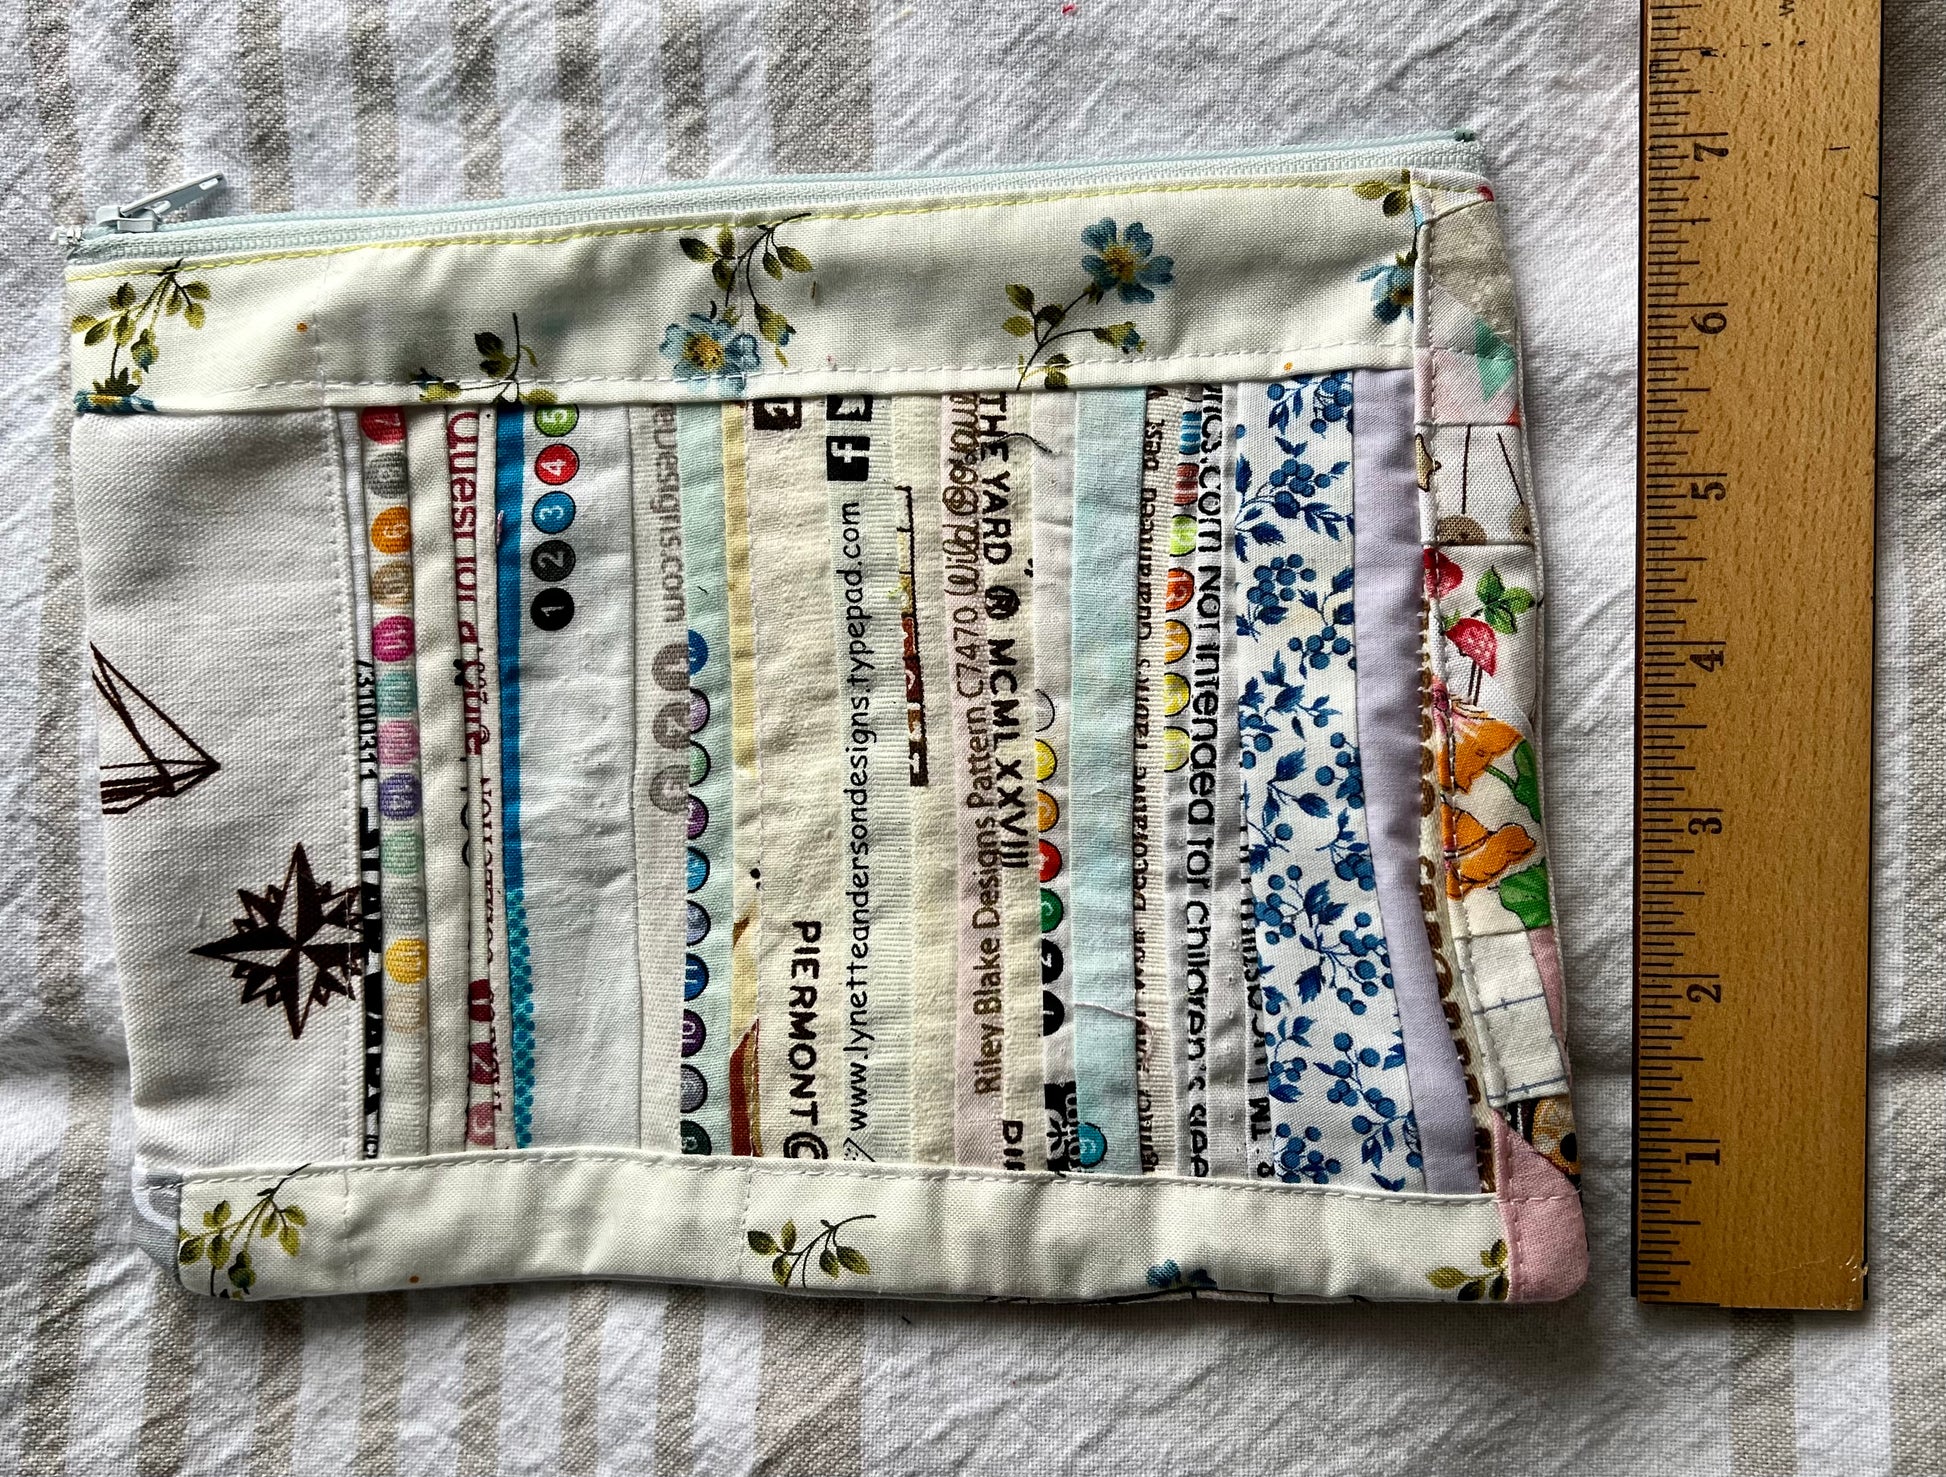 scrappy selvedge zipper pouch, with a ruler off to the side showing the width to be about 7 inches